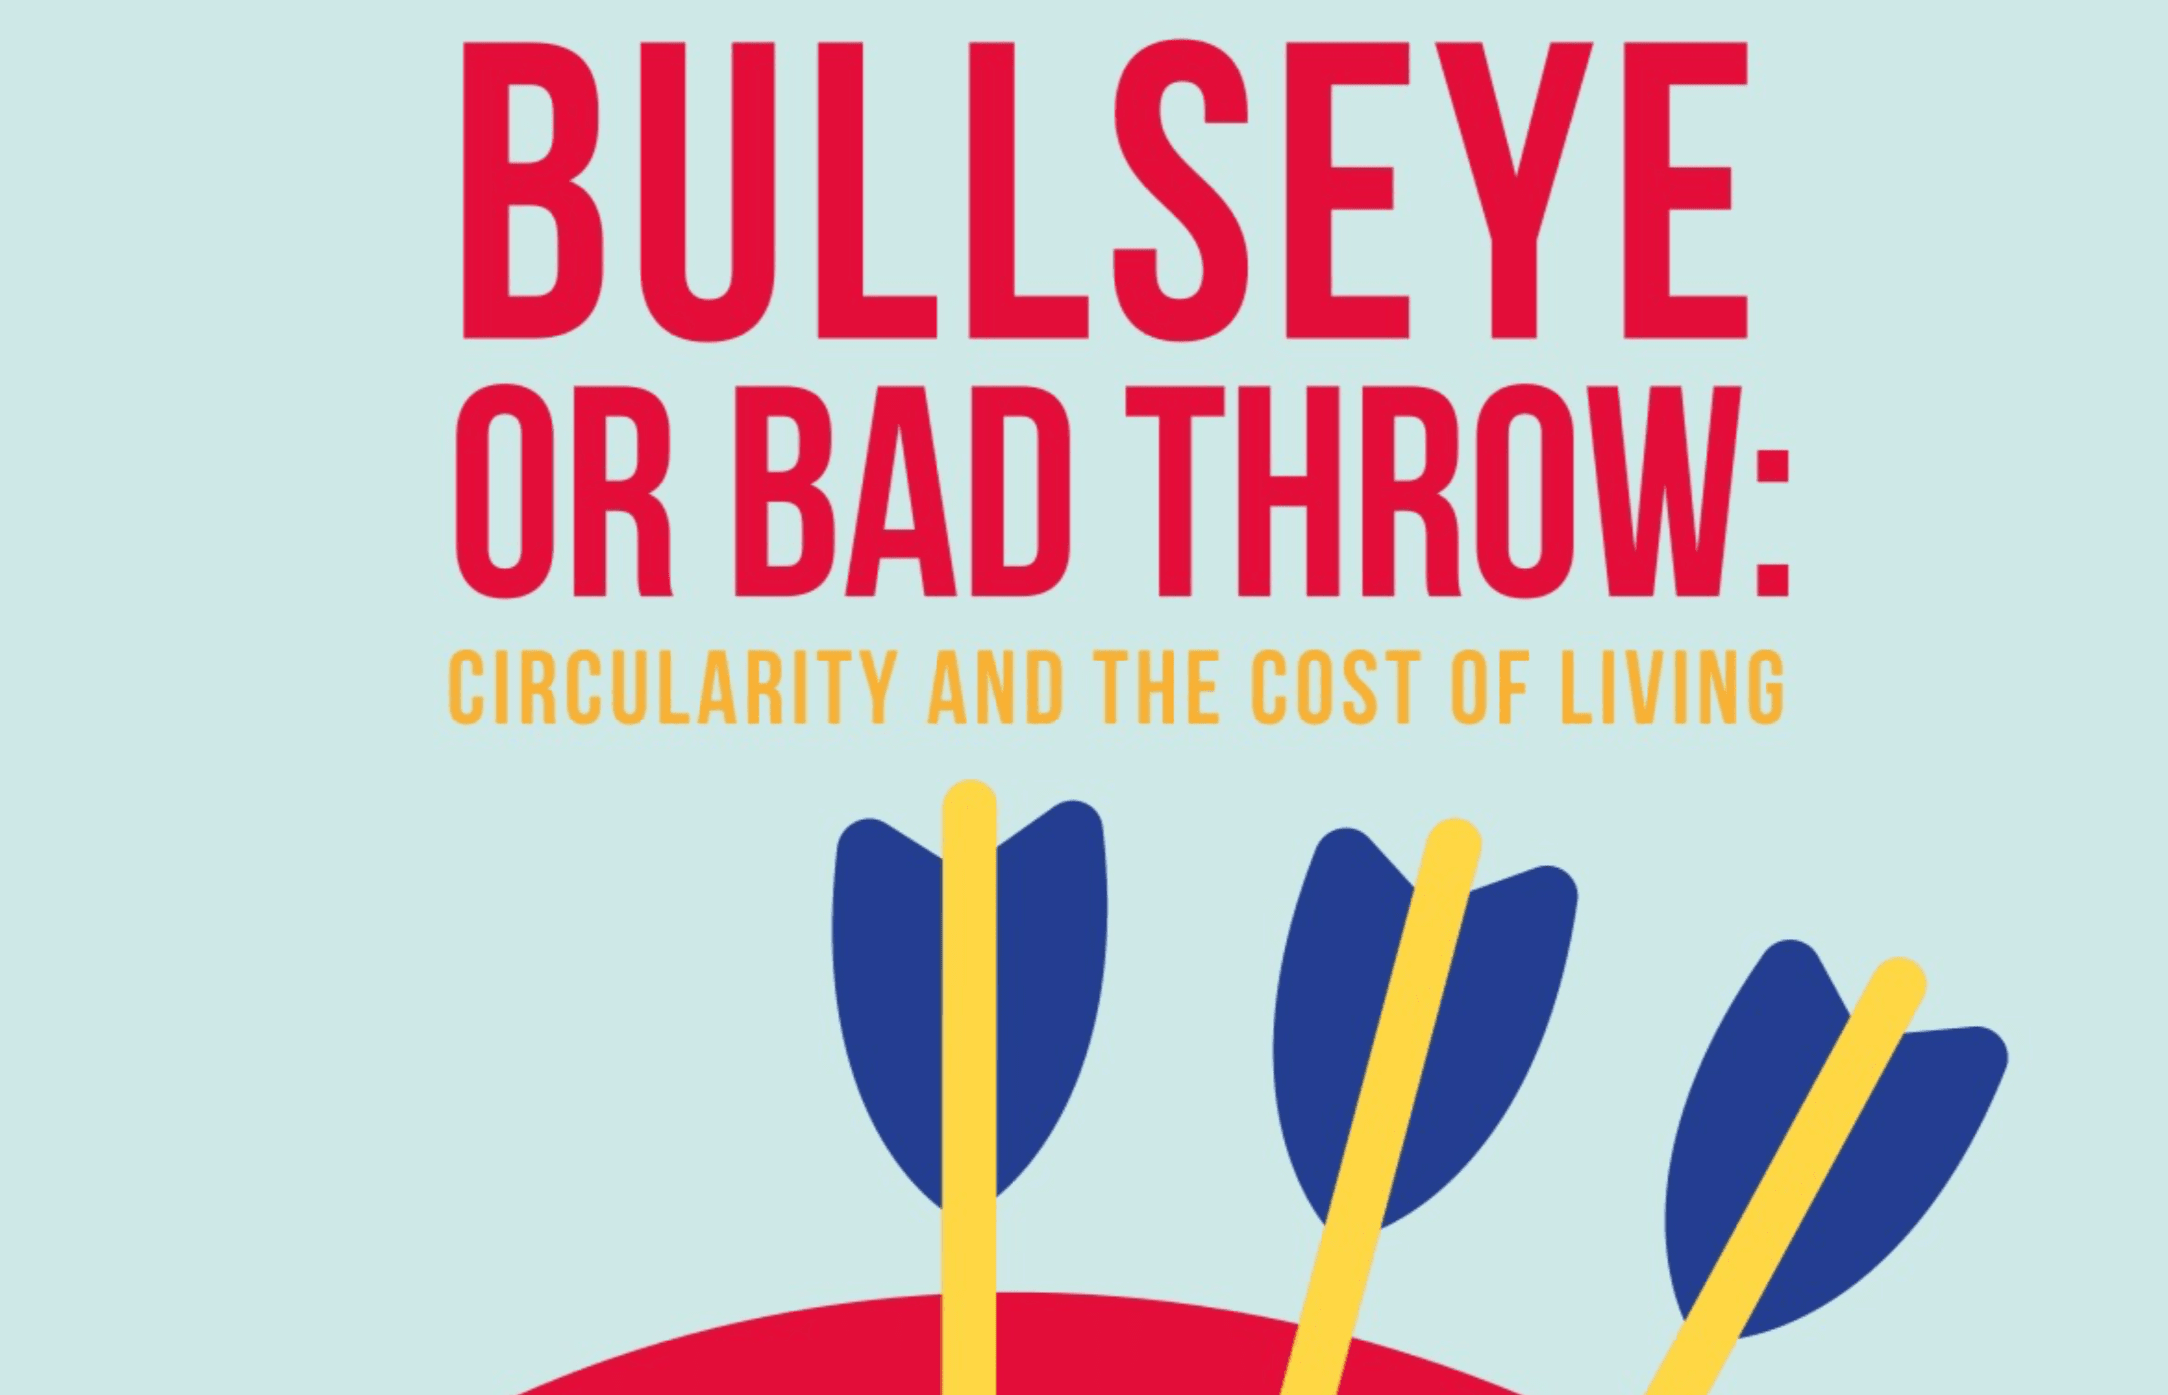 Bullseye or Bad Throw: Circularity and the Cost of Living